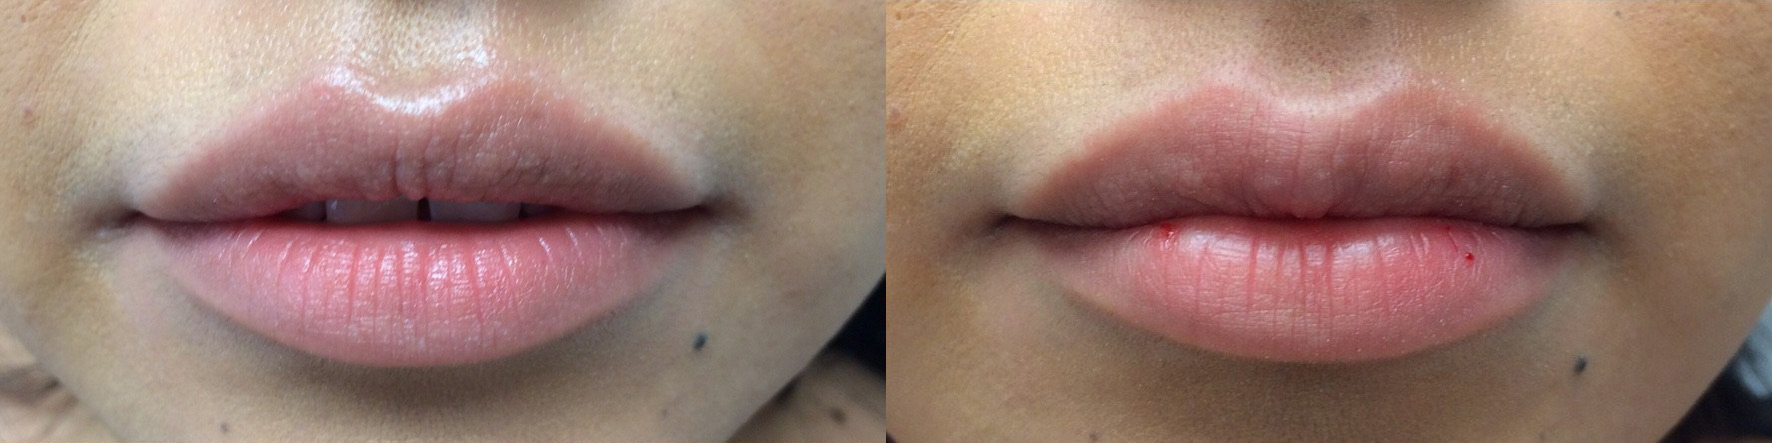 Lip Filler Before and After Photo by Dr. James Y. Wang of Metropolis Dermatology in Los Angeles, CA